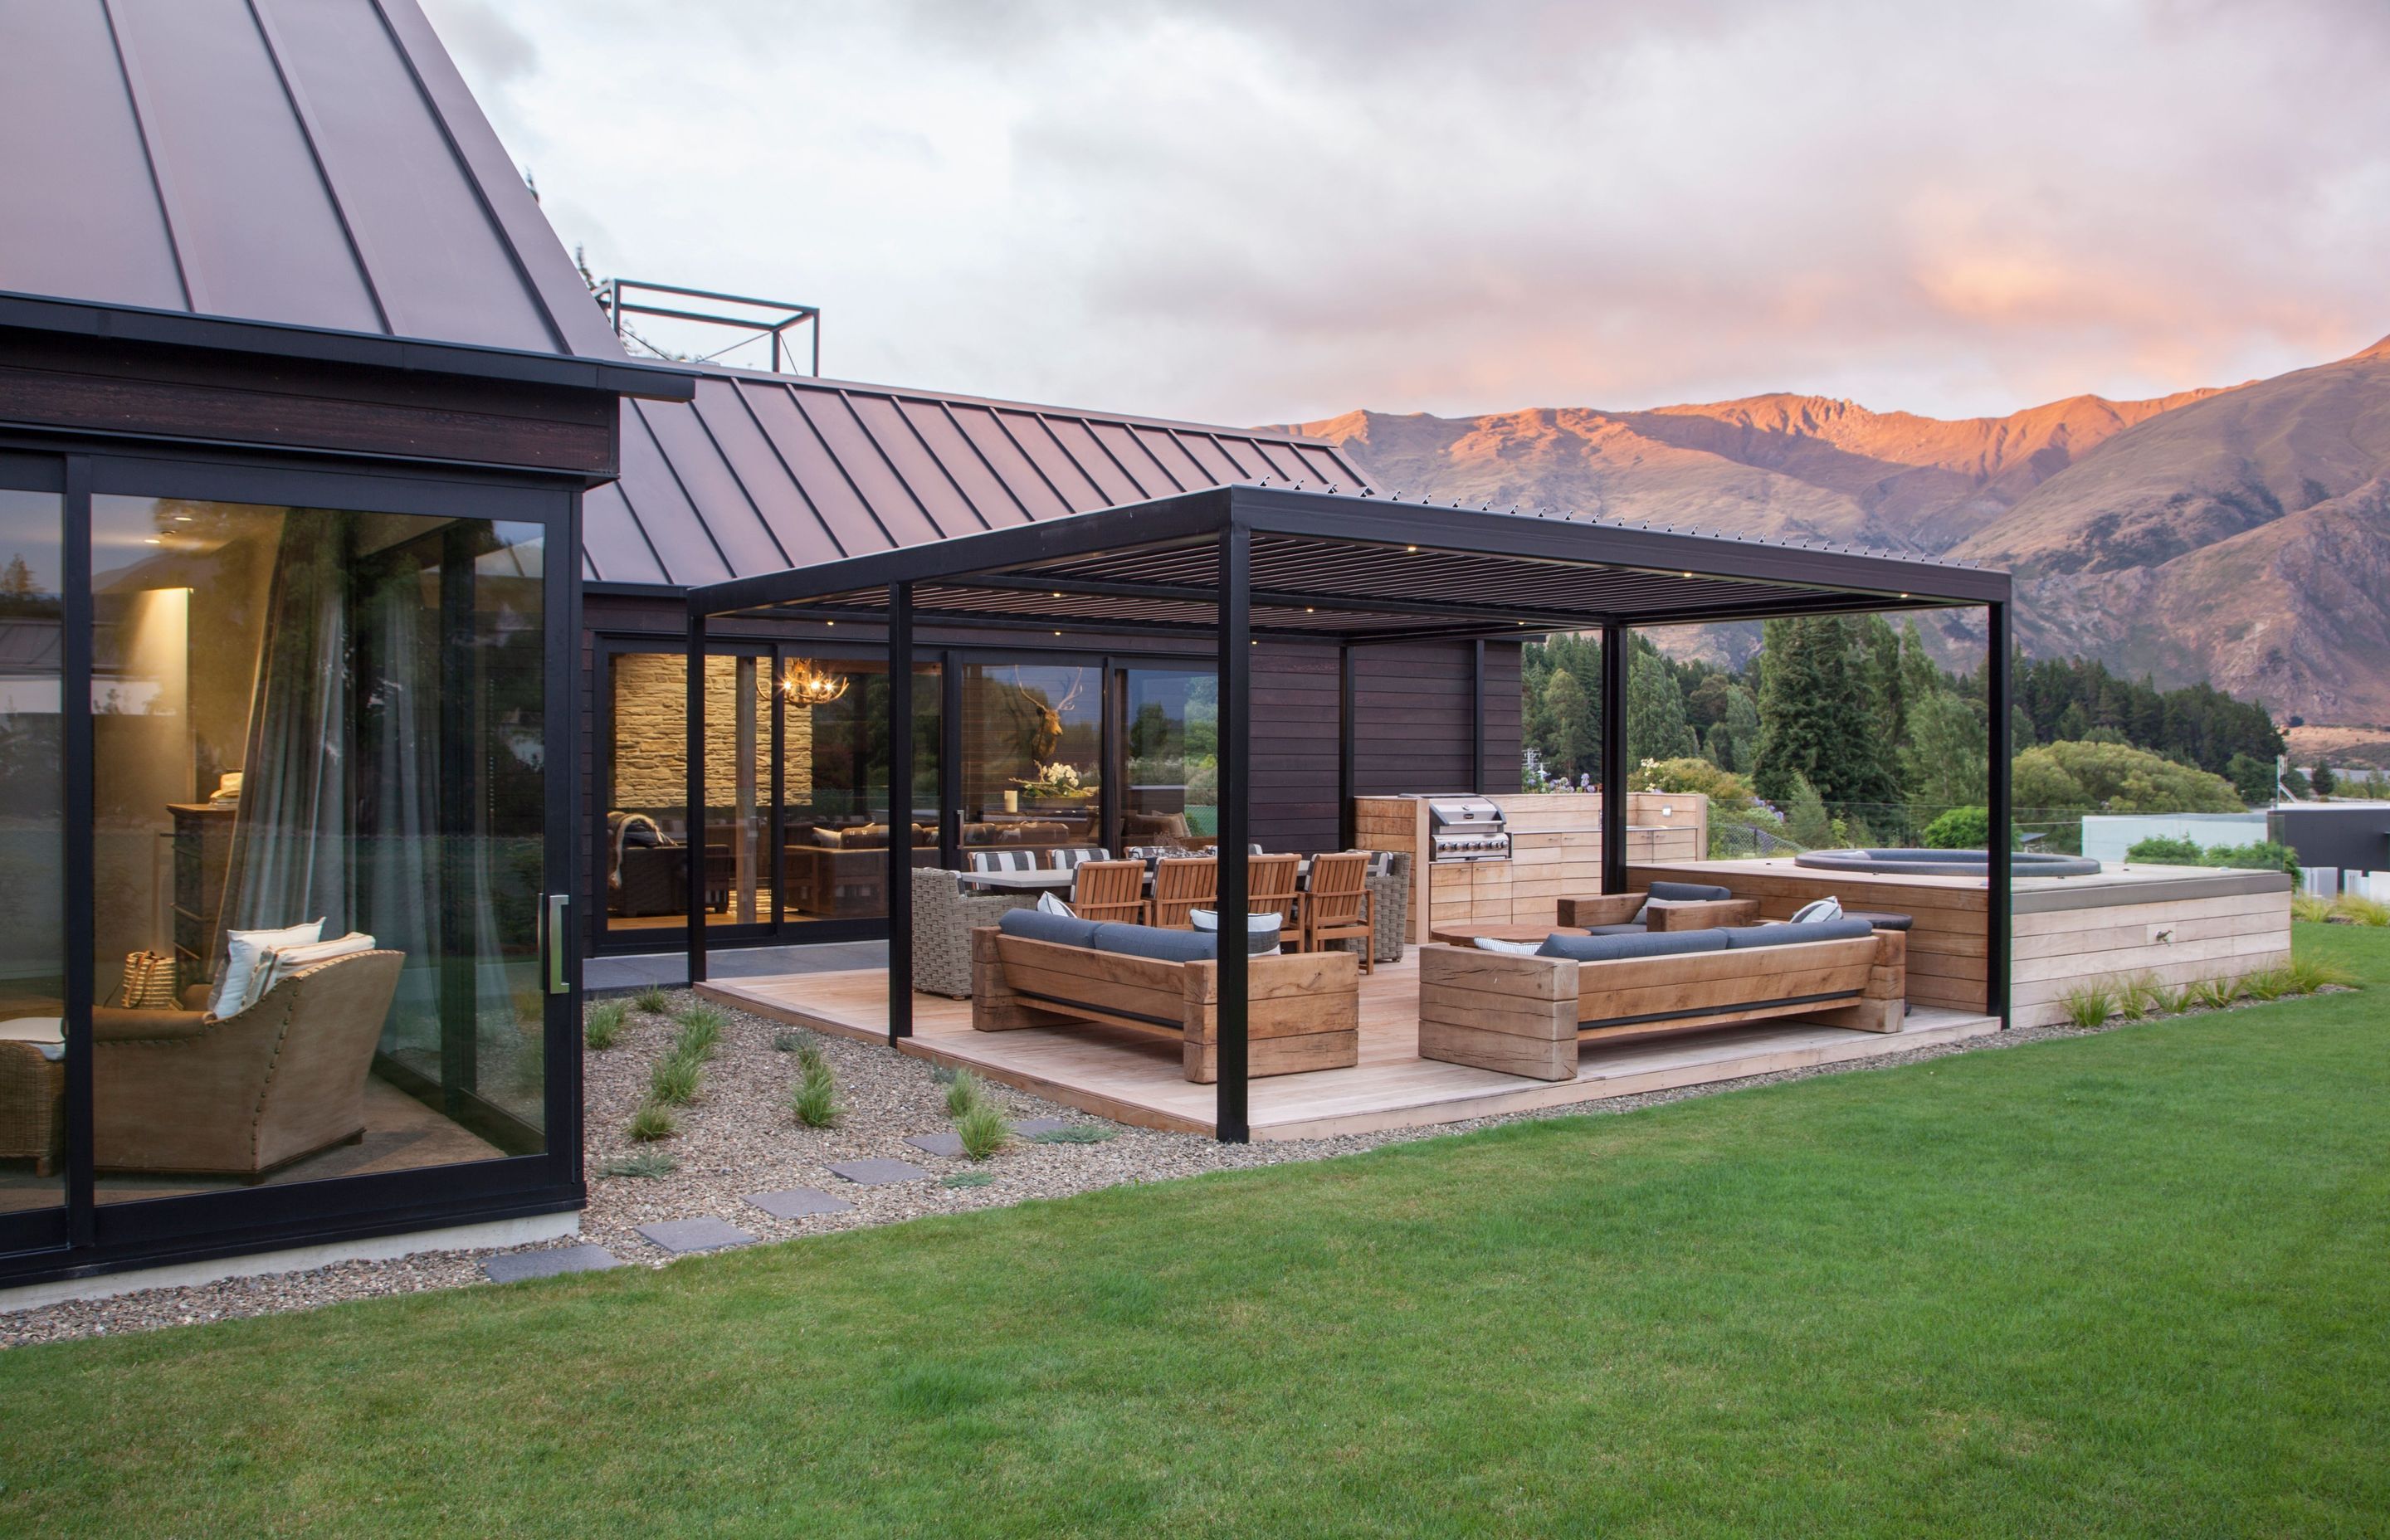 This project in Arrowtown (Wanaka) employs a steel RHS (box section) structure